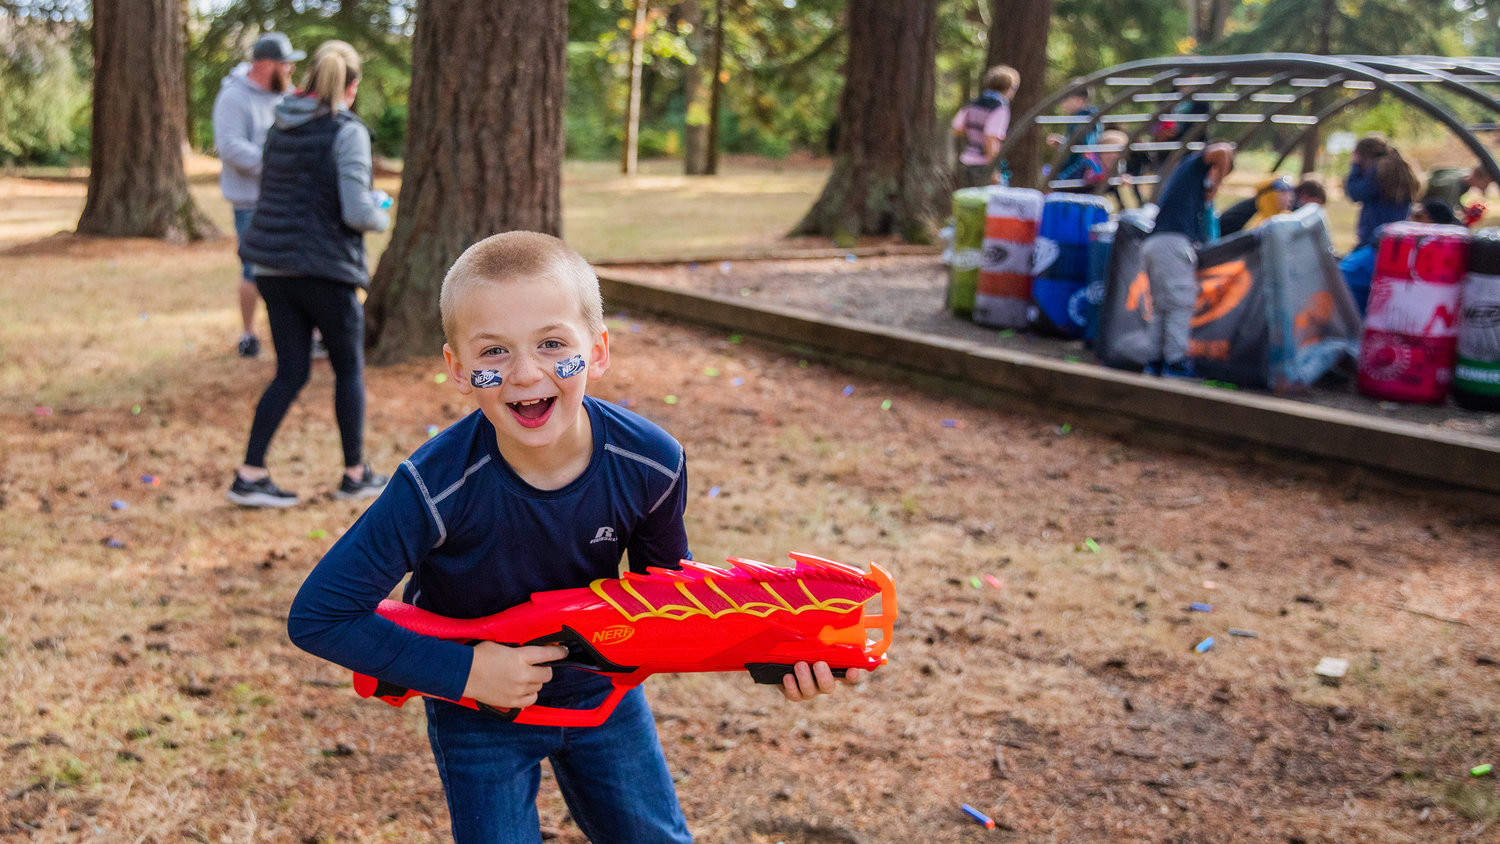 Stetson Sickles, 10, smiles while holding a toy blaster at a Nerf war hosted by Gemini Events at Borst Park in support of his brother Titus, 4, who has a terminal heart condition. Titus was unable to attend after falling ill and spending the night on oxygen at Seattle Children’s Hospital. See more photos at chronline.com.